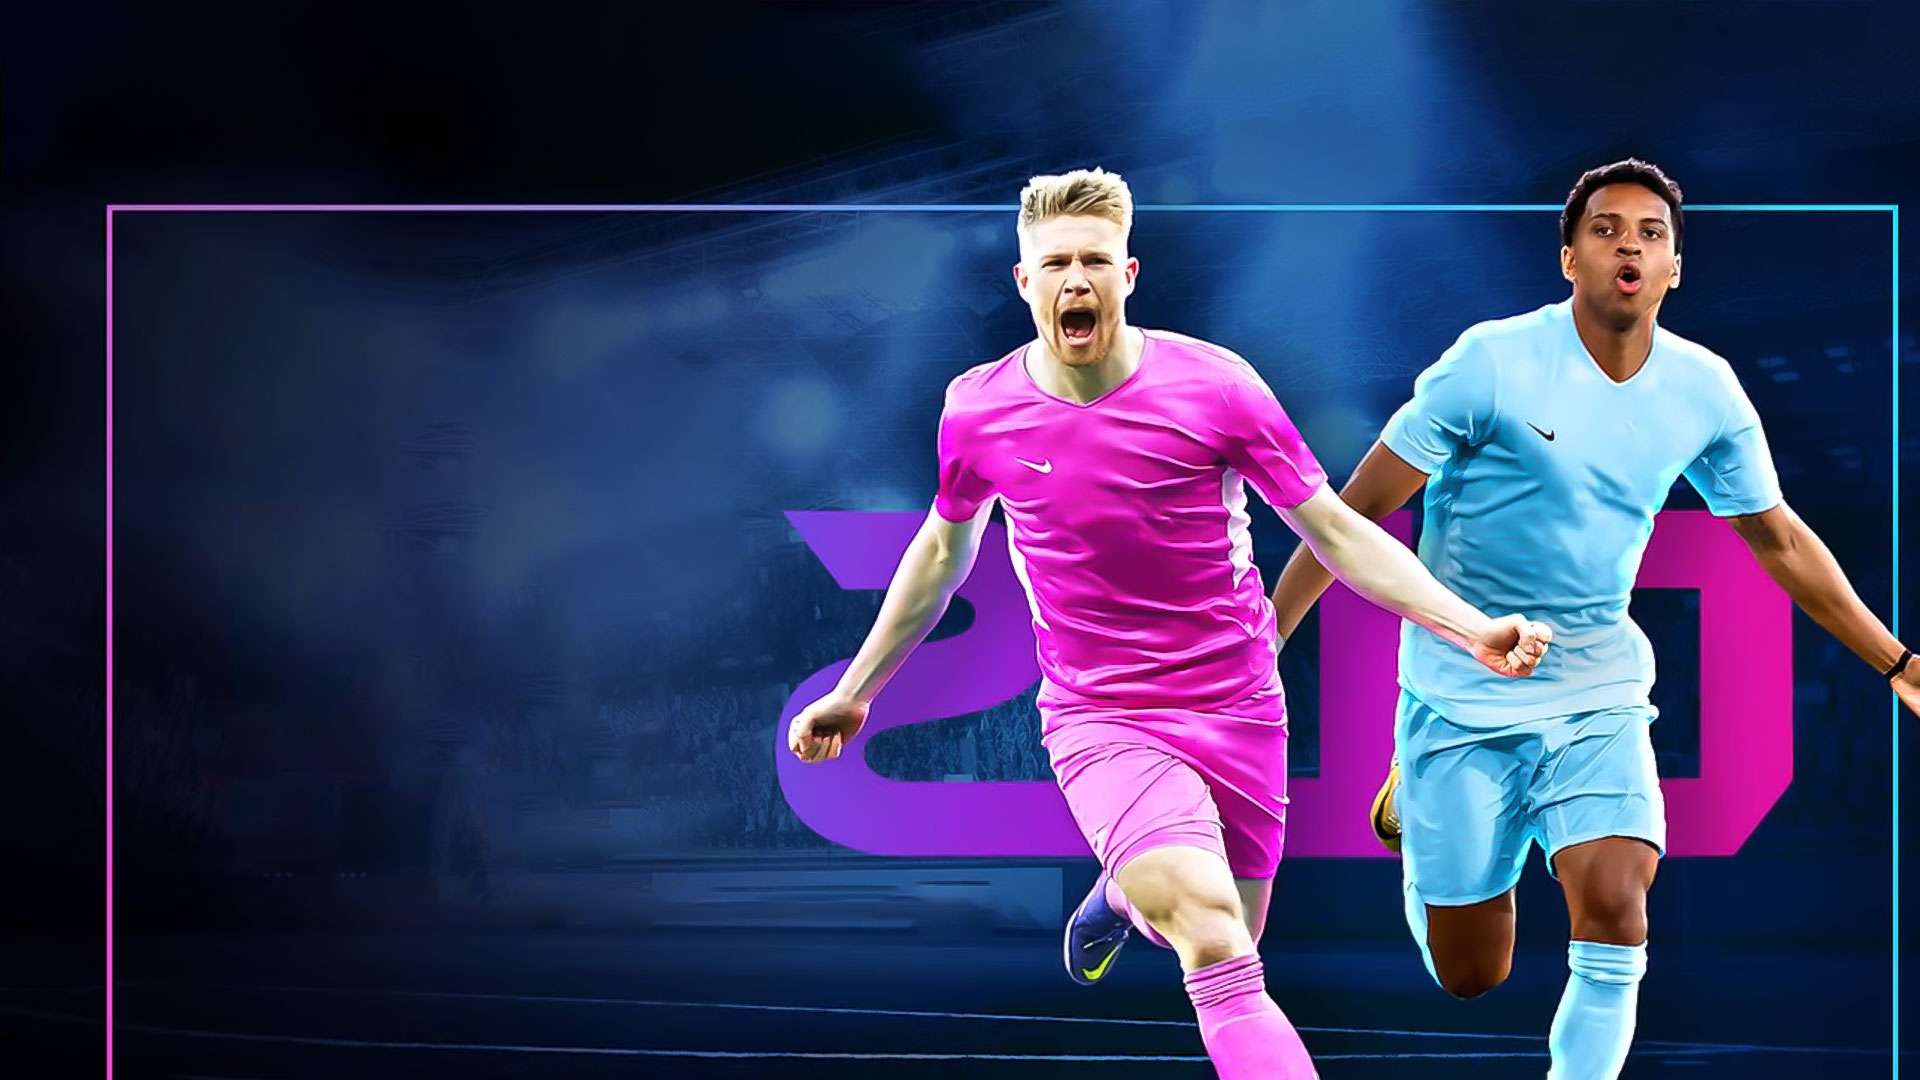 Dream League Soccer Kits for Android - Download the APK from Uptodown